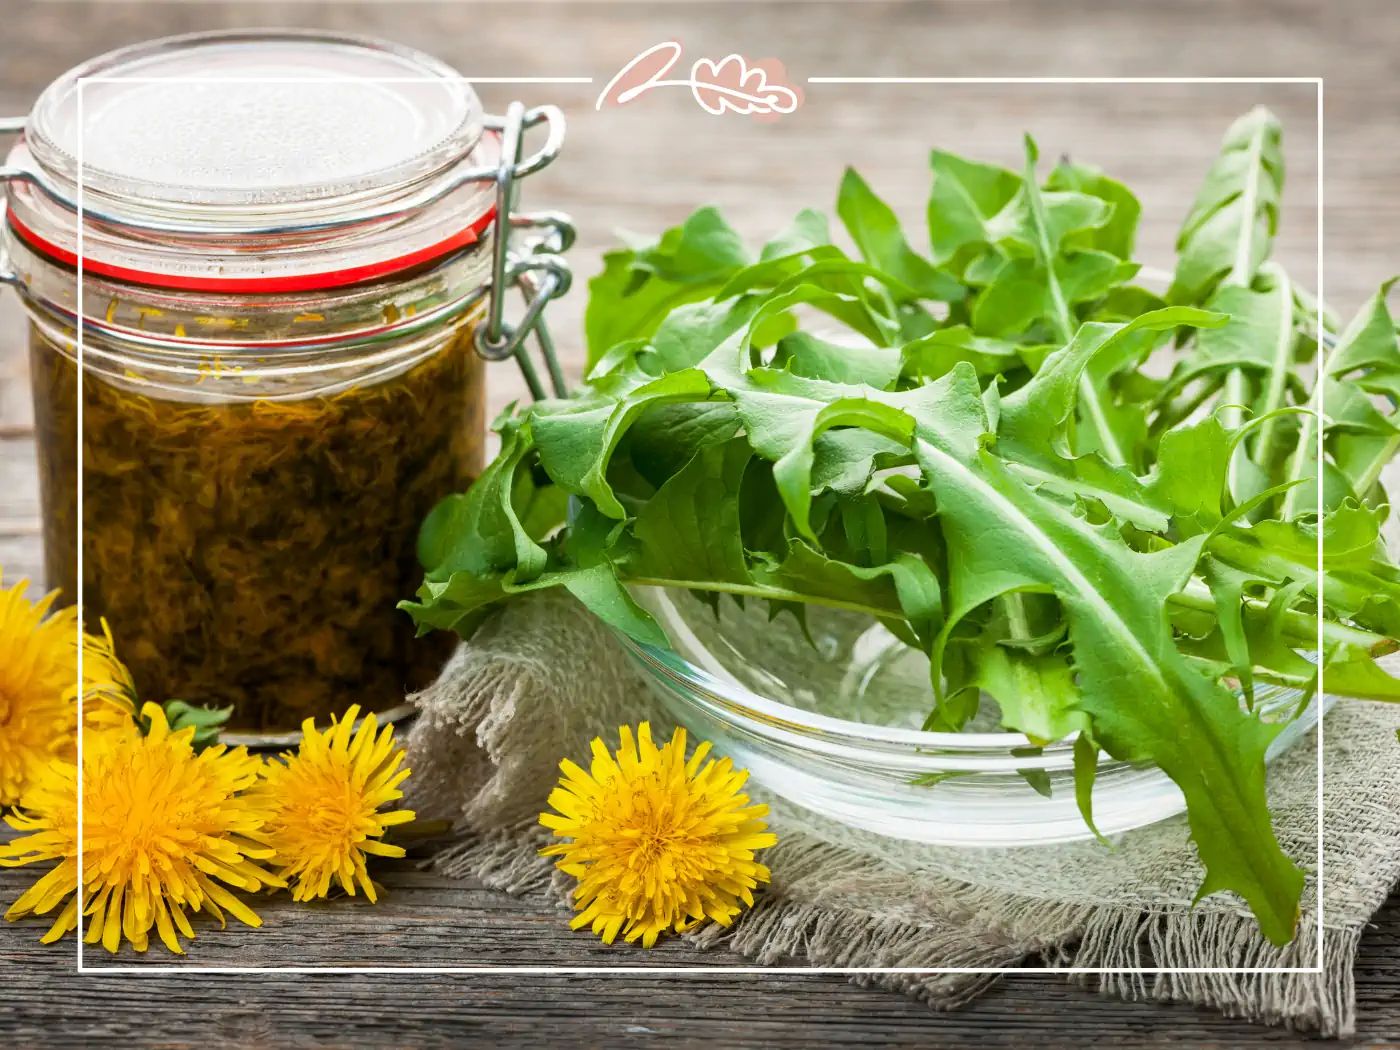 Jar of preserved dandelions and a bowl of fresh dandelion greens. Fabulous Flowers and Gifts.